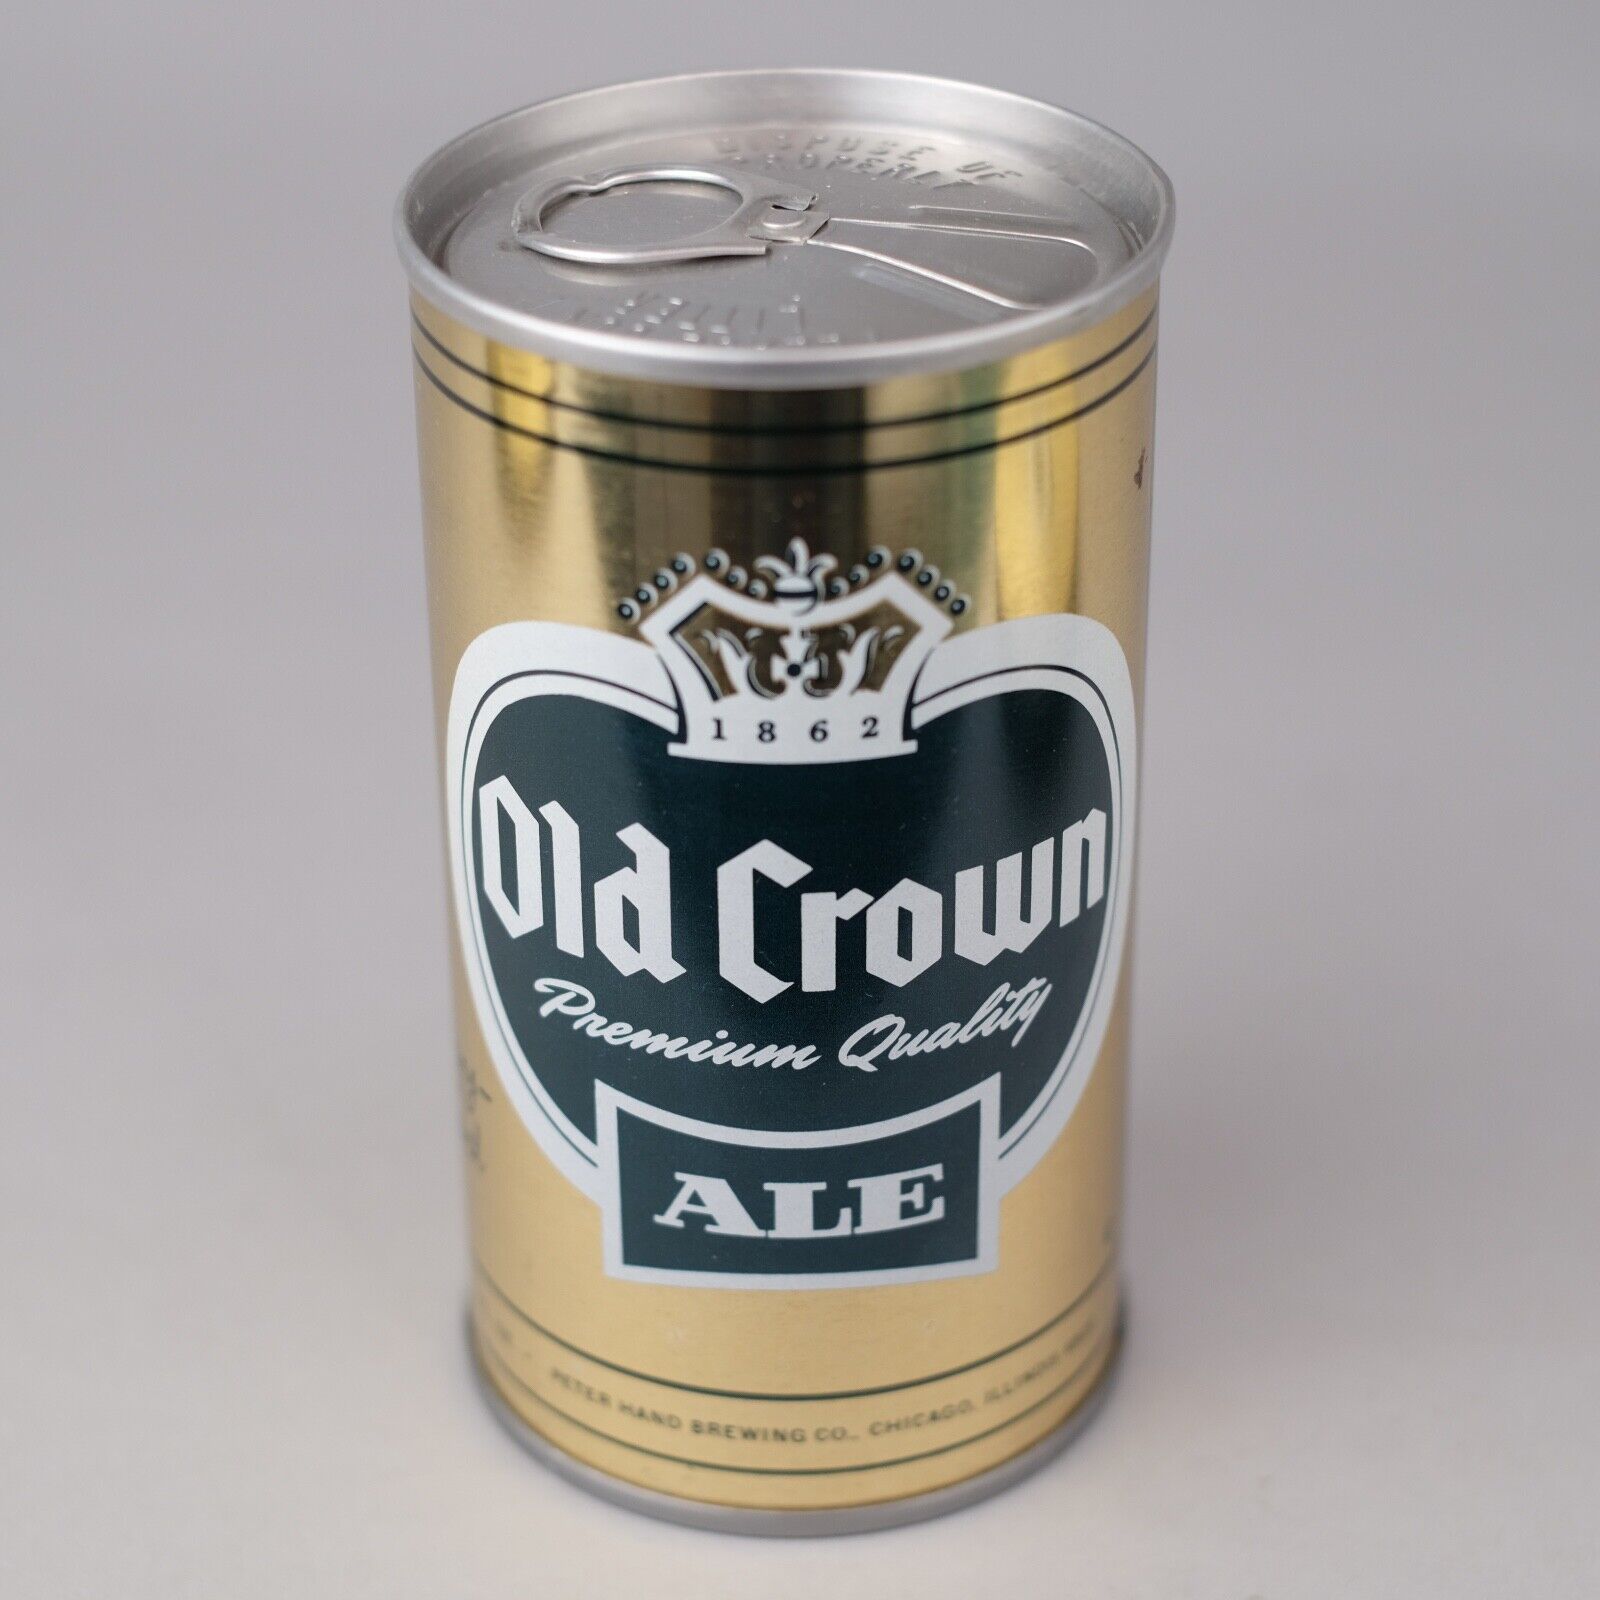 1960s OLD CROWN 1862 ALE Prem. Beer Can 12 oz Tab Top PETER HAND Brewing Chicago